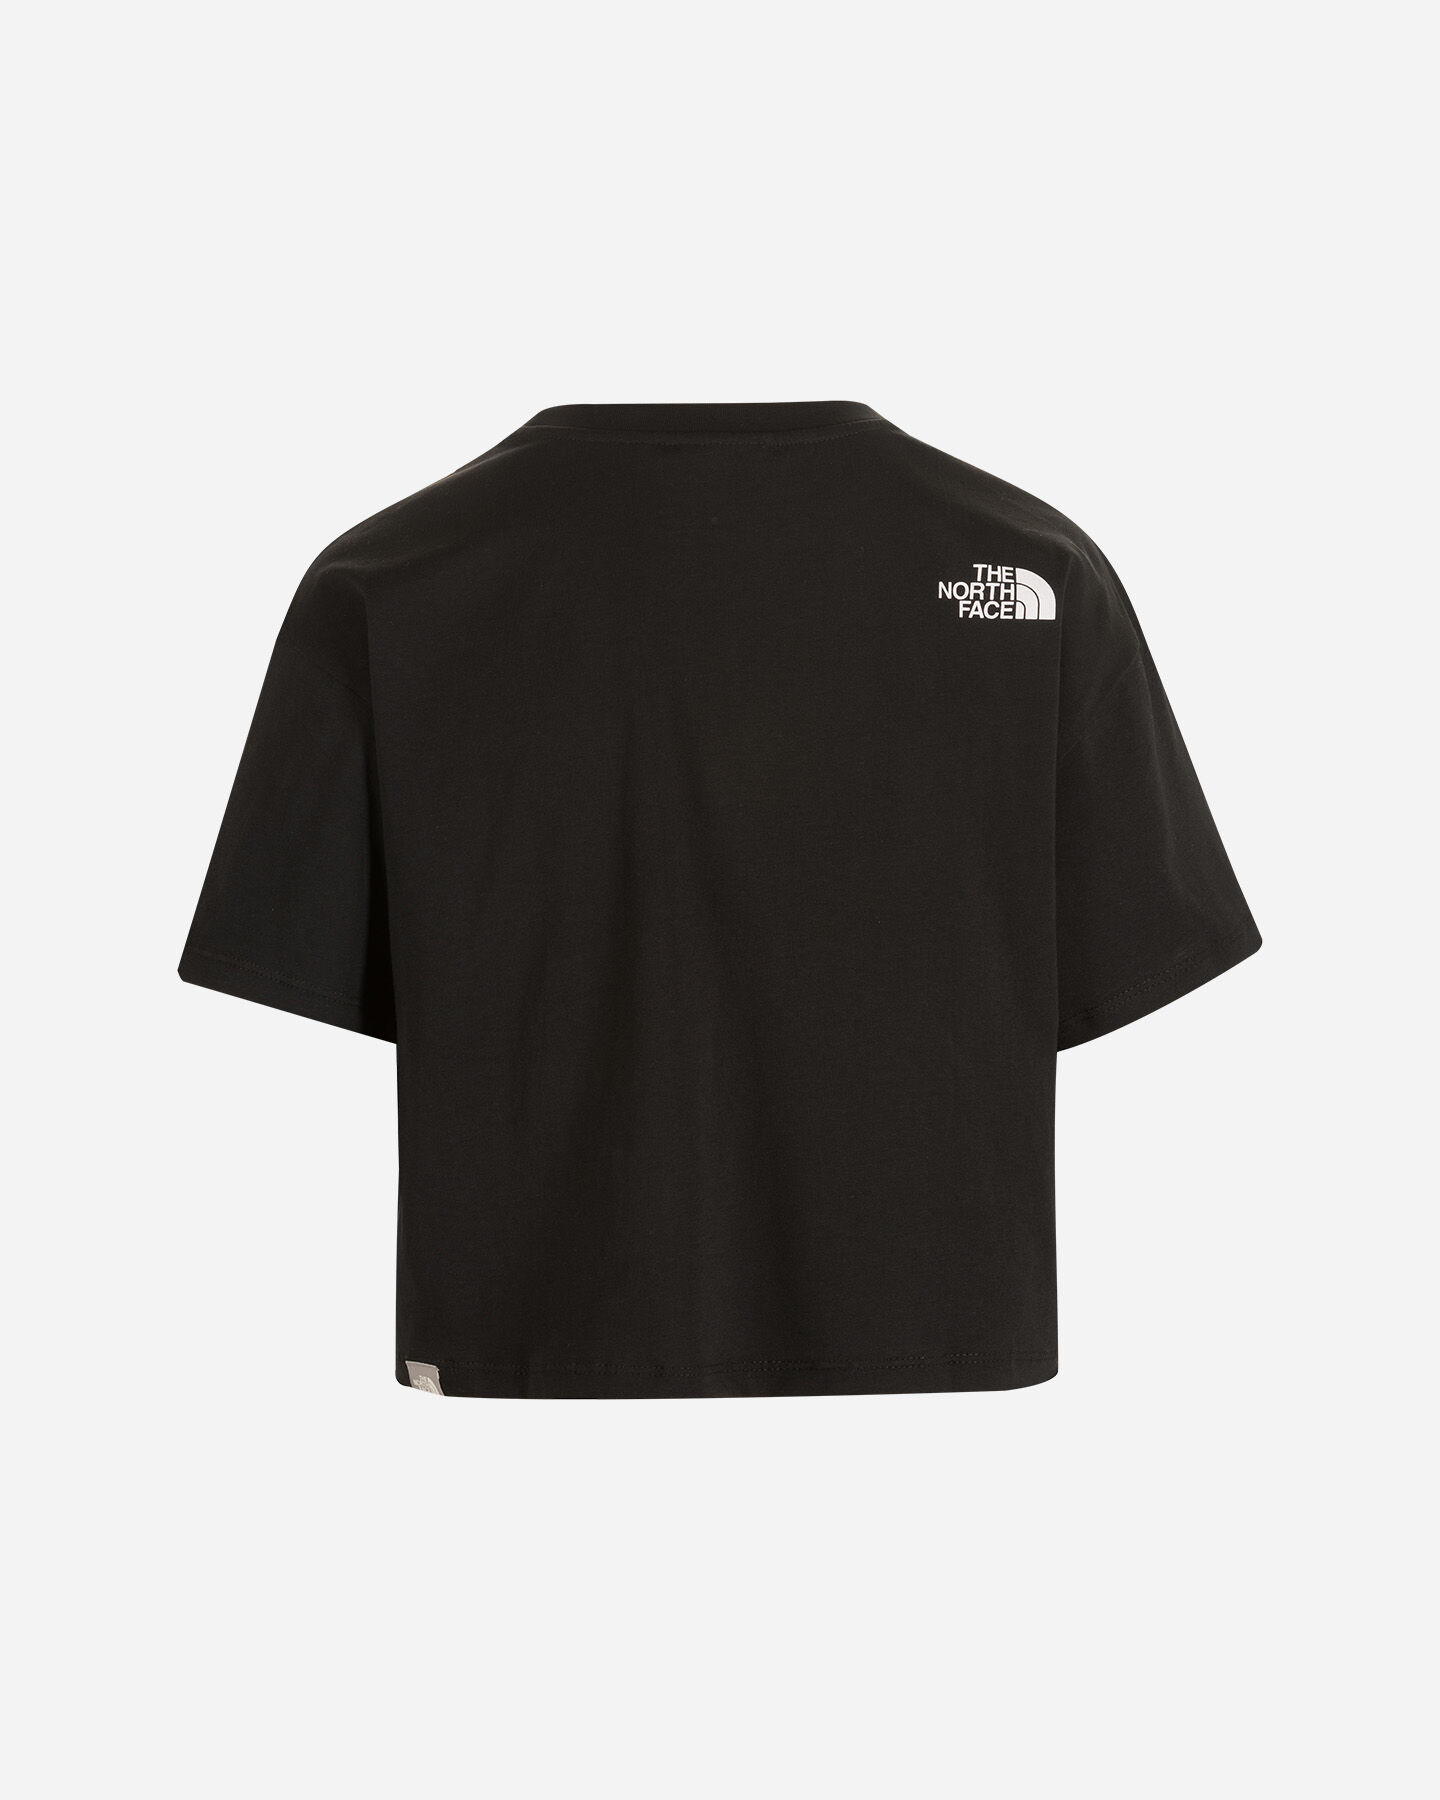  T-Shirt THE NORTH FACE CROP W S5203588 scatto 1